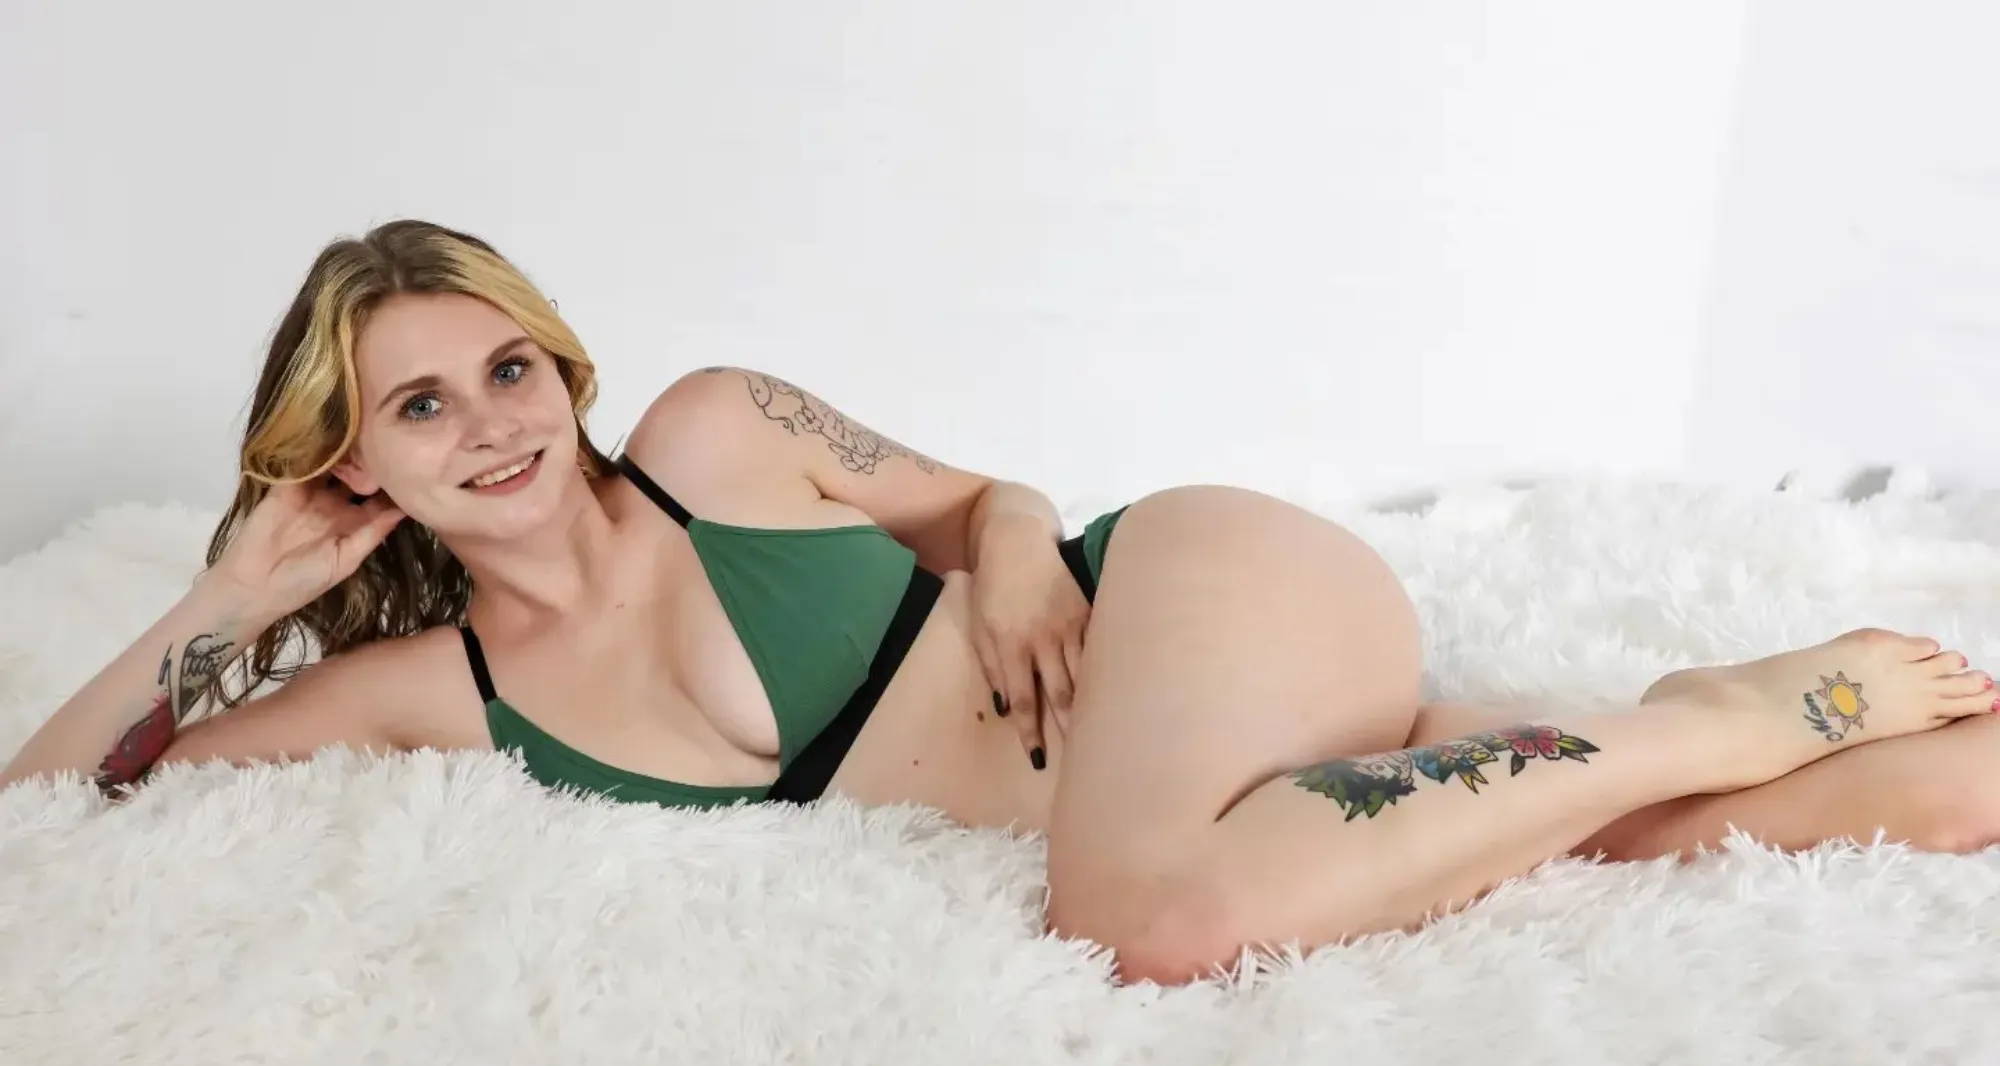 blonde woman with tattoos laying on one side on a white fluffy rug wearing a green triangle bra and undies set